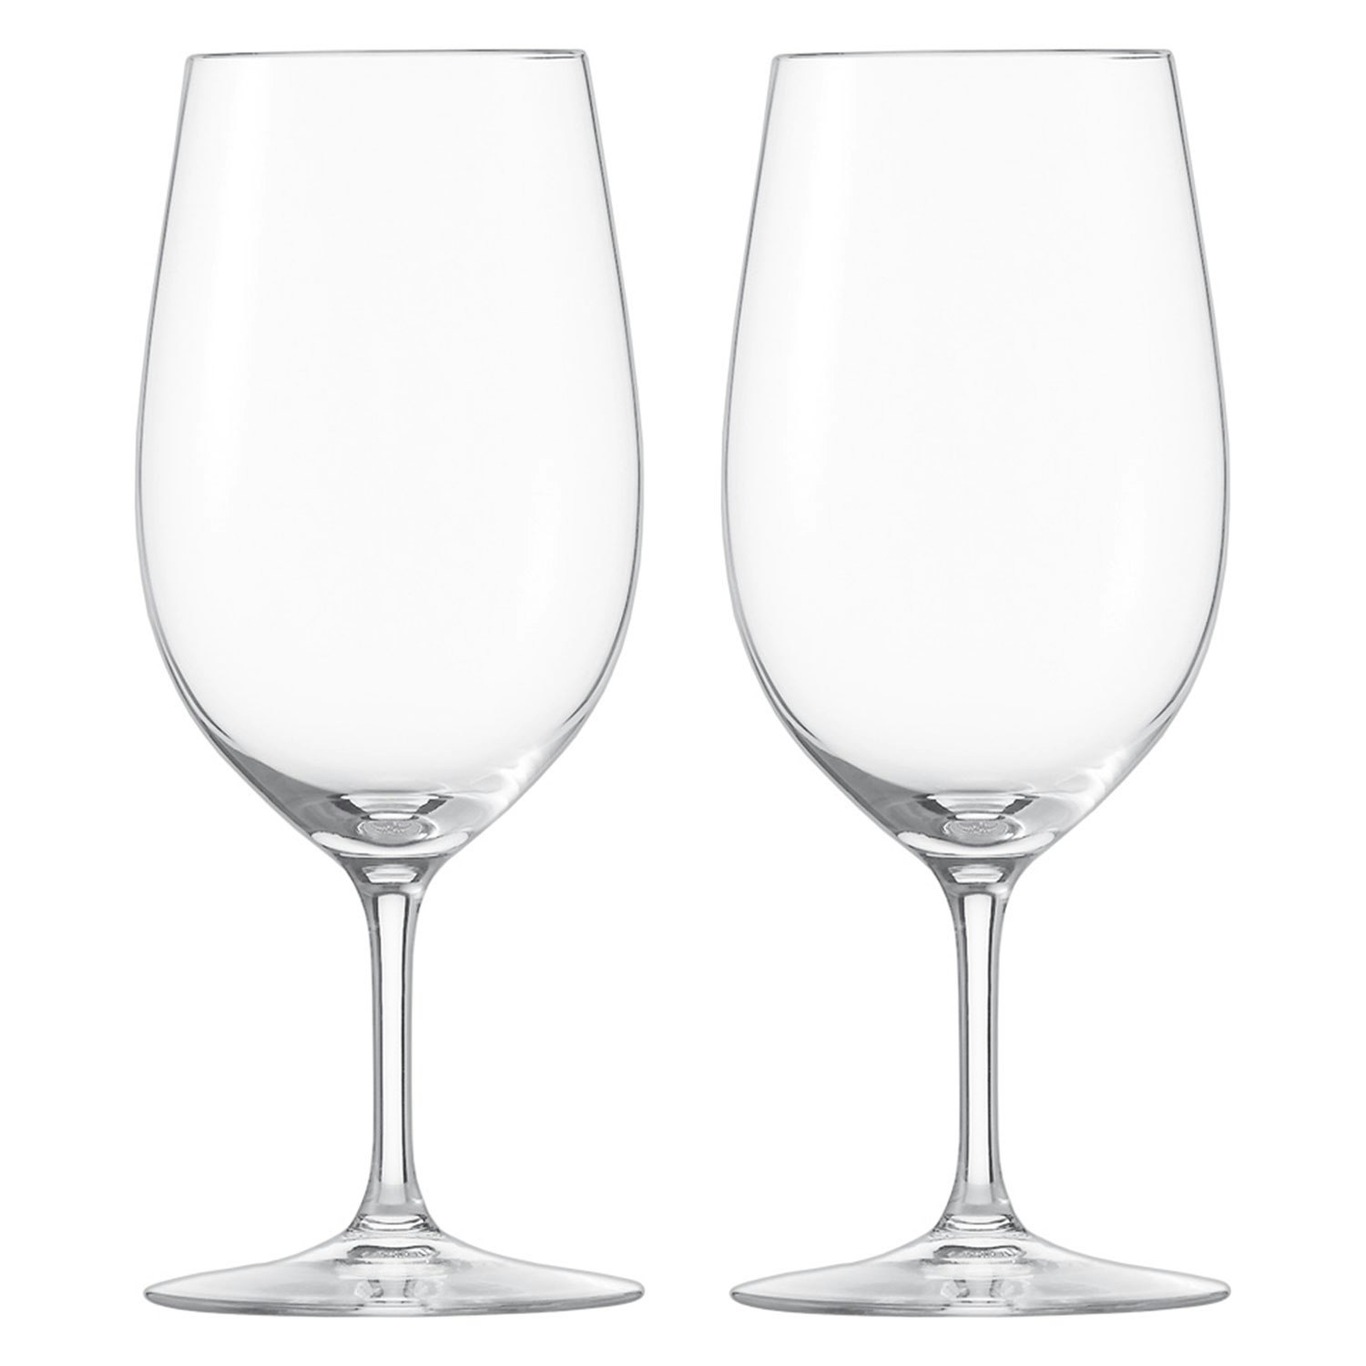 https://royaldesign.com/image/2/zwiesel-enoteca-water-glass-36-cl-2-pack-0?w=800&quality=80